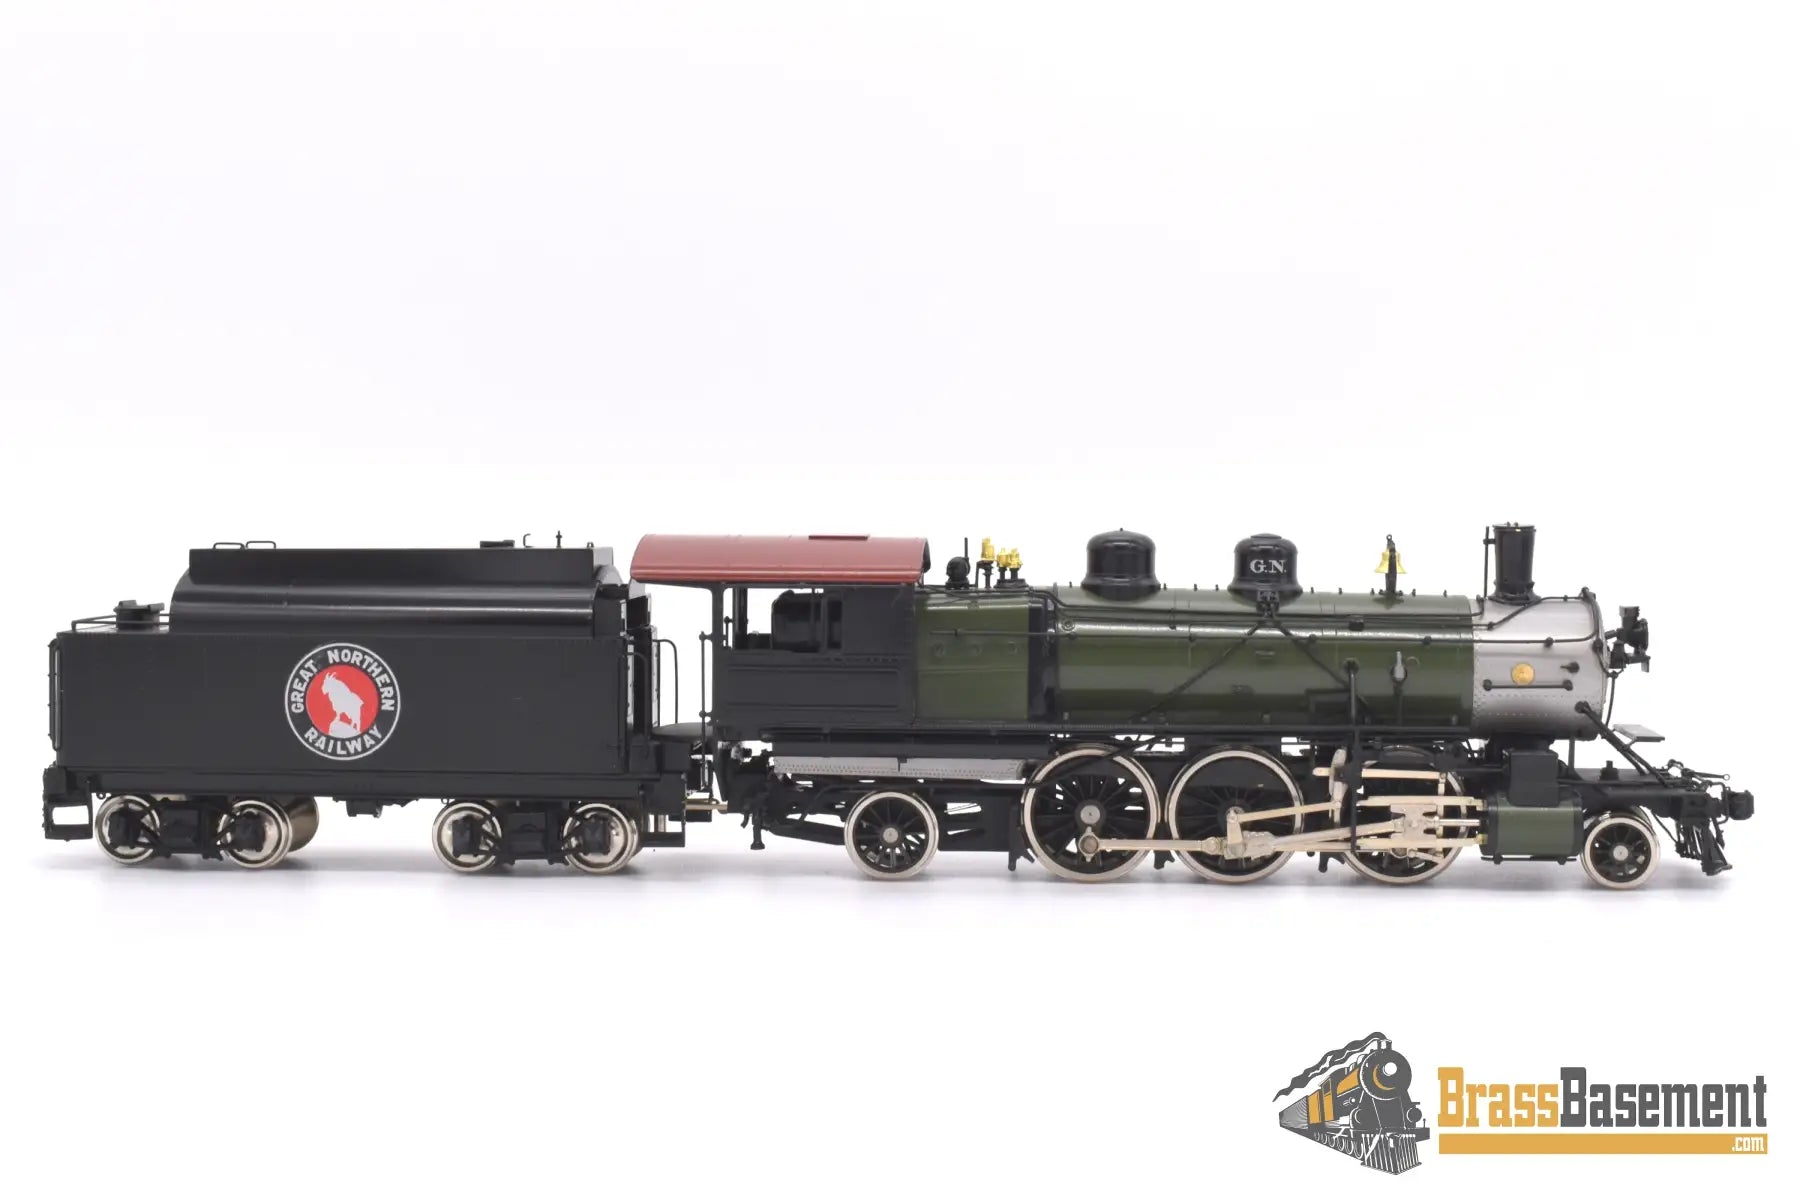 Ho Brass - Oriental Great Northern Gn J - 1 2 - 6 - 2 Factory Painted Mint Steam